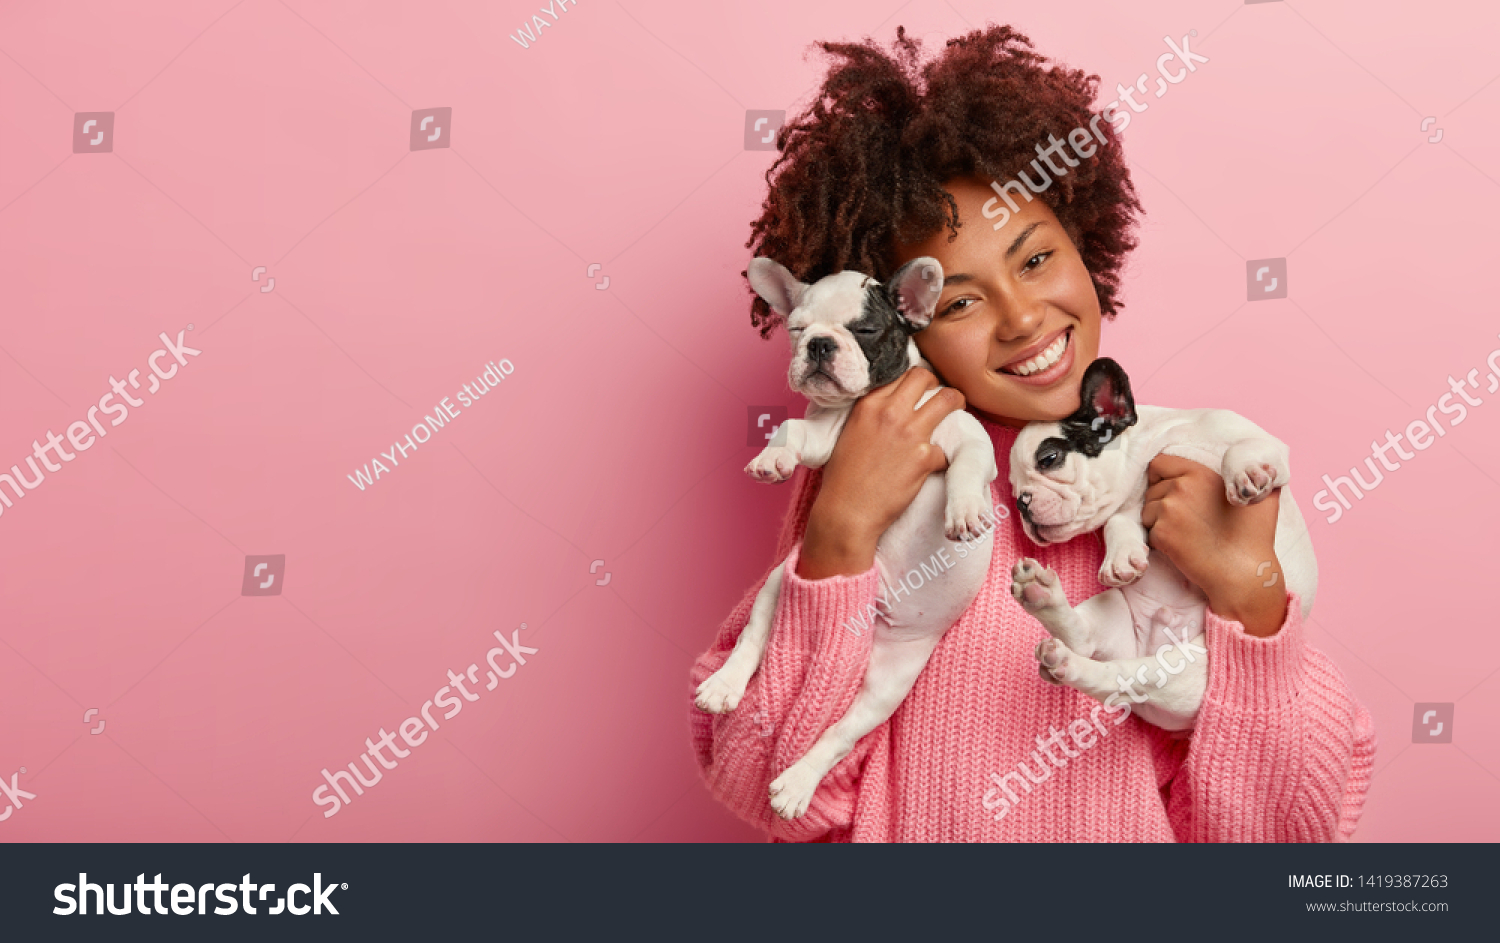 Happy female pet lover poses with two pedigree dogs, tilts head, has curly hair, wears pink sweater, isolated over rosy background, free space for your advertising. Friendship, people, animals concept #1419387263